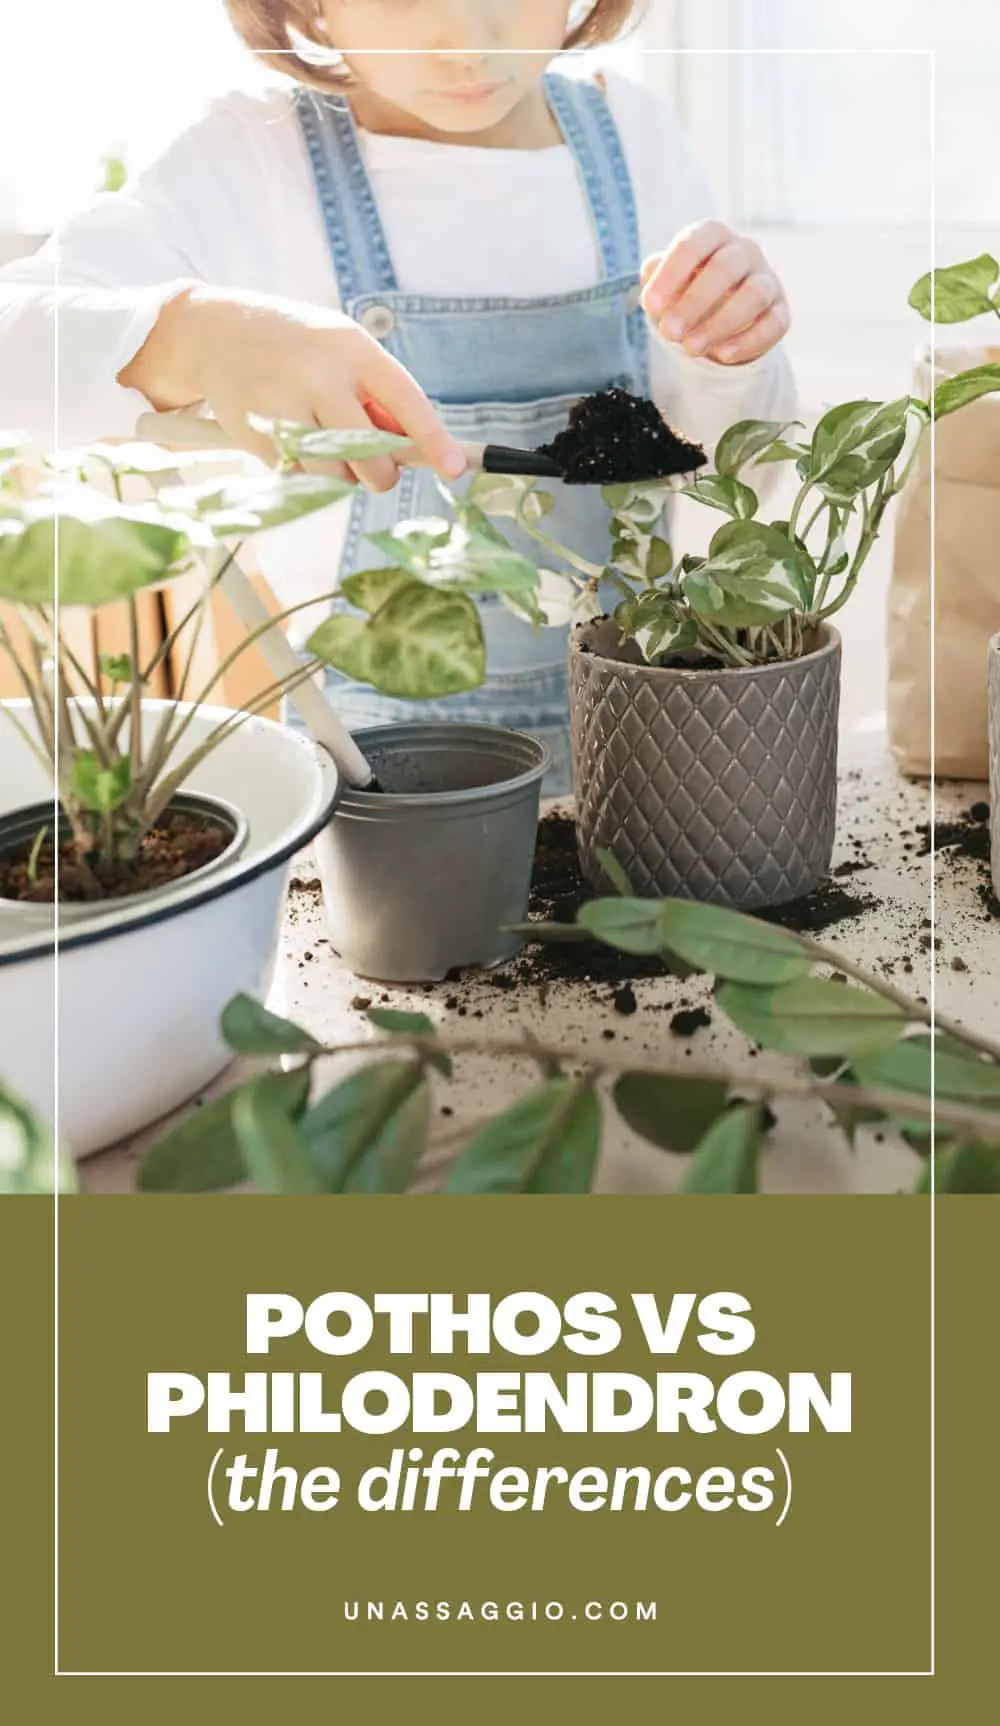 Differences Between Pothos and Philodendrons